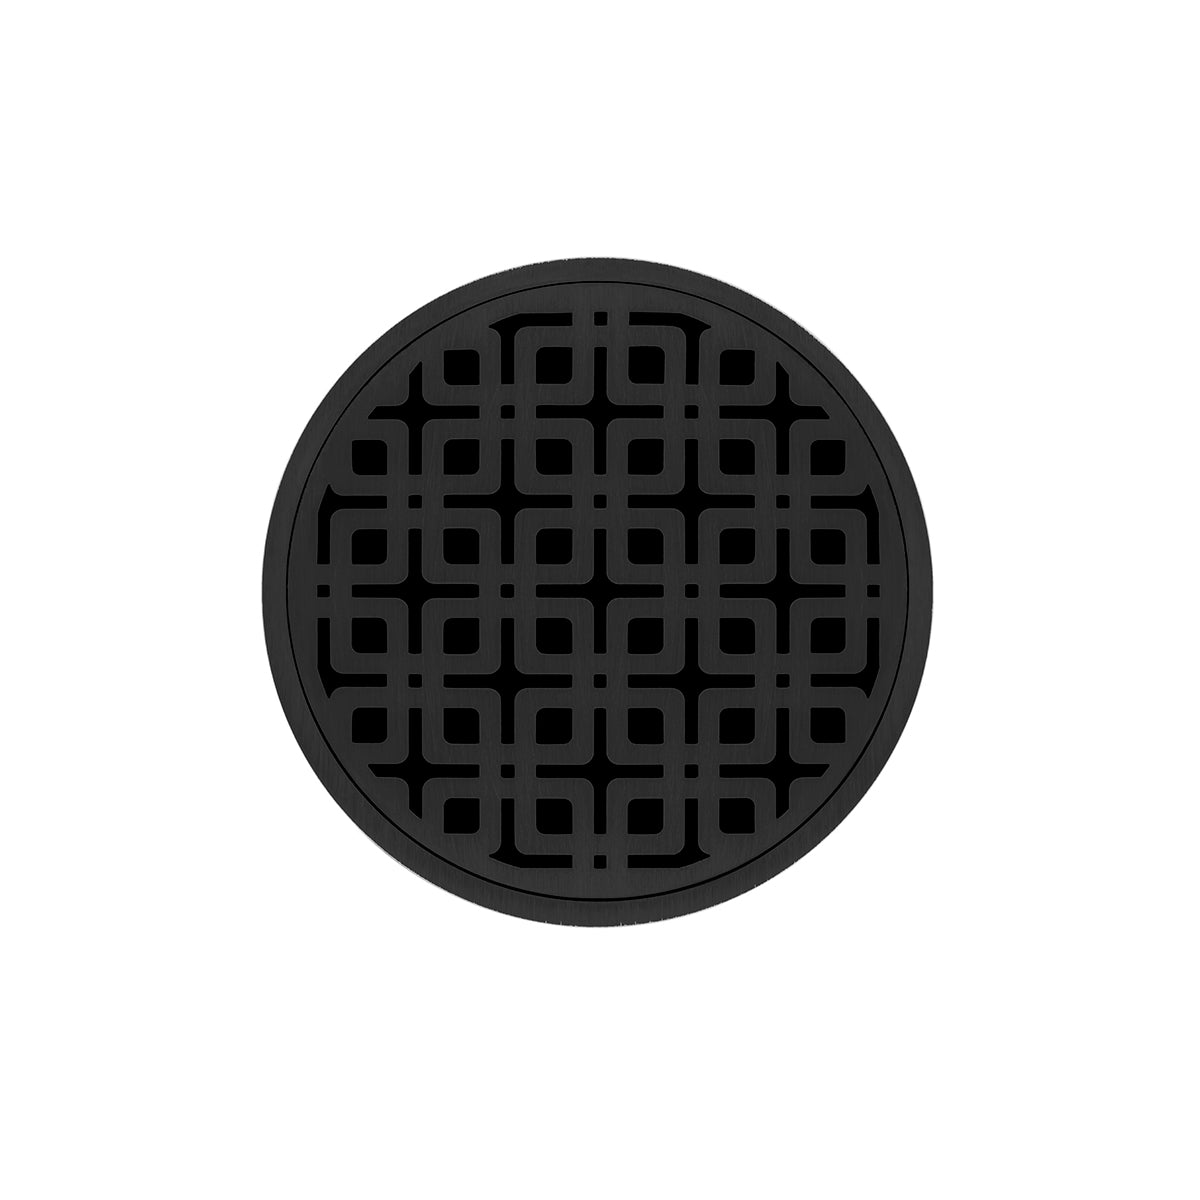 Infinity Drain 5" Round RKD 5 High Flow Premium Center Drain Kit with Link Pattern Decorative Plate with ABS Drain Body, 3" Outlet